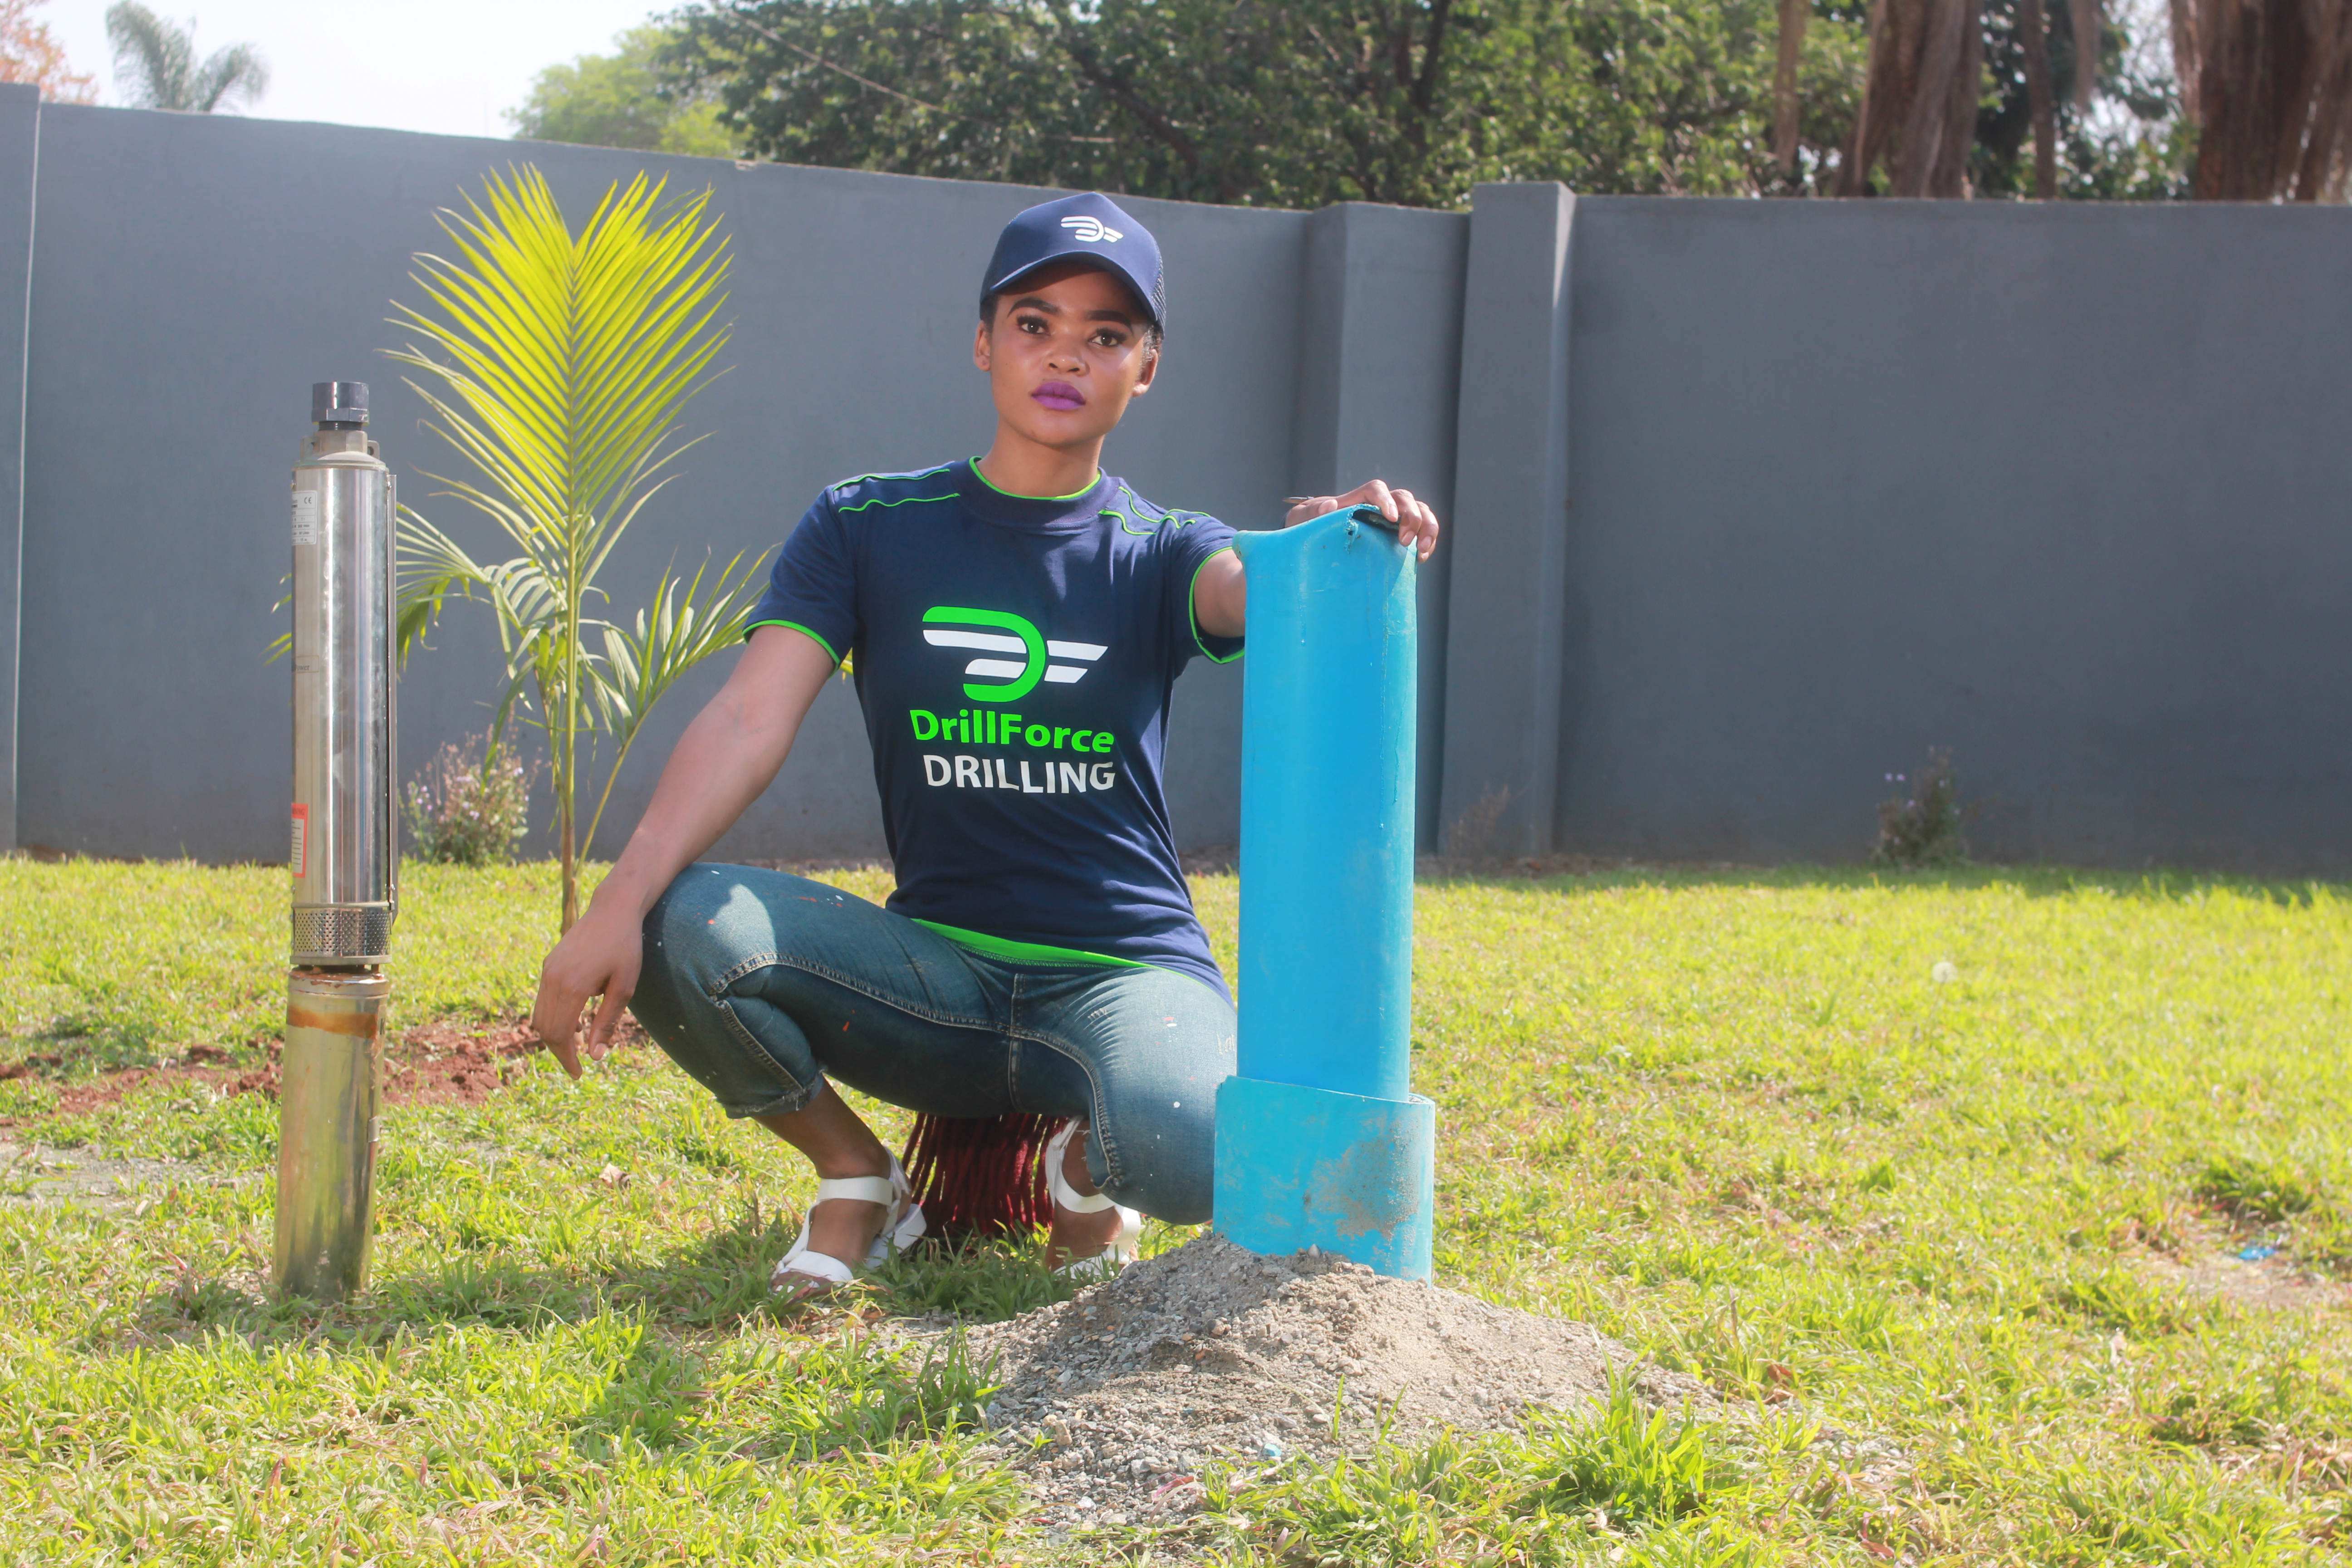 Borehole Casing in Zimbabwe with Drillforce Borehole Drilling!